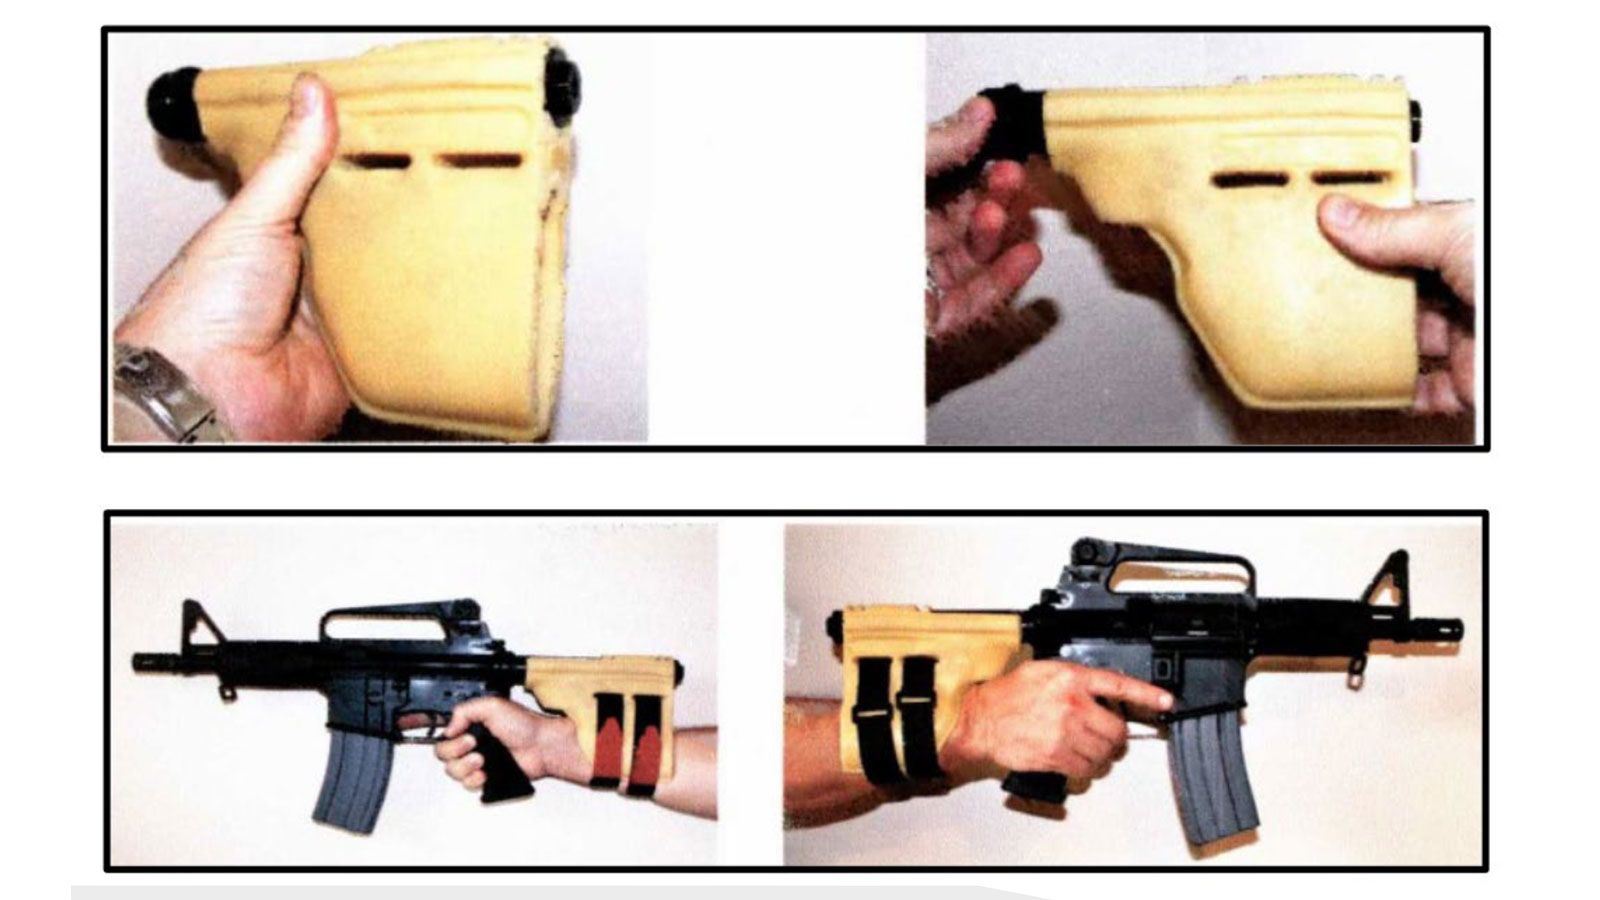 Republican AGs sue ATF over new rule regulating pistol-stabilizing